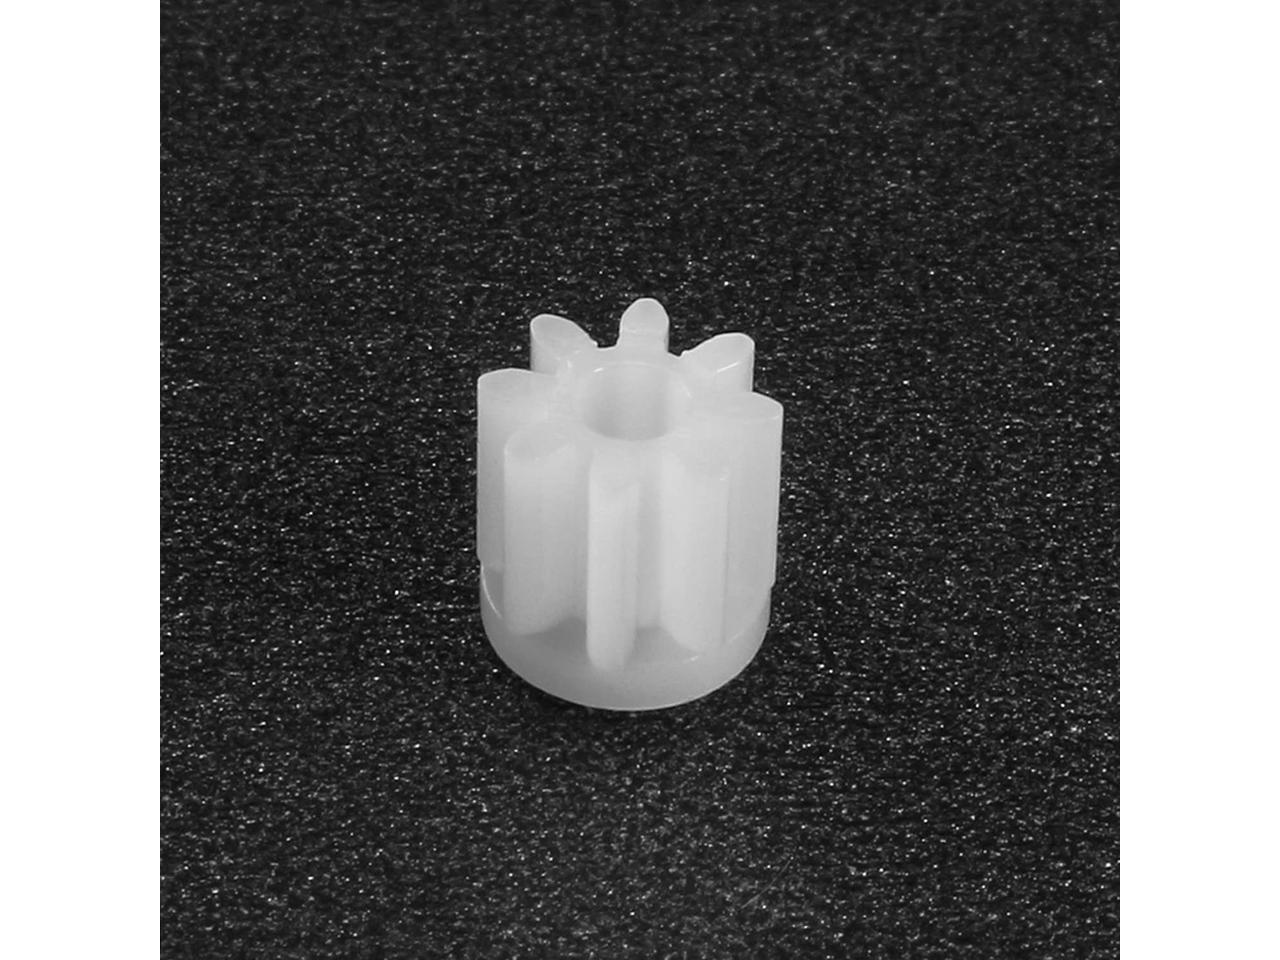 uxcell 50pcs Plastic Gears 8 Teeth Model 082A Reduction Gear Plastic Worm Gears for RC Car Robot Motor 